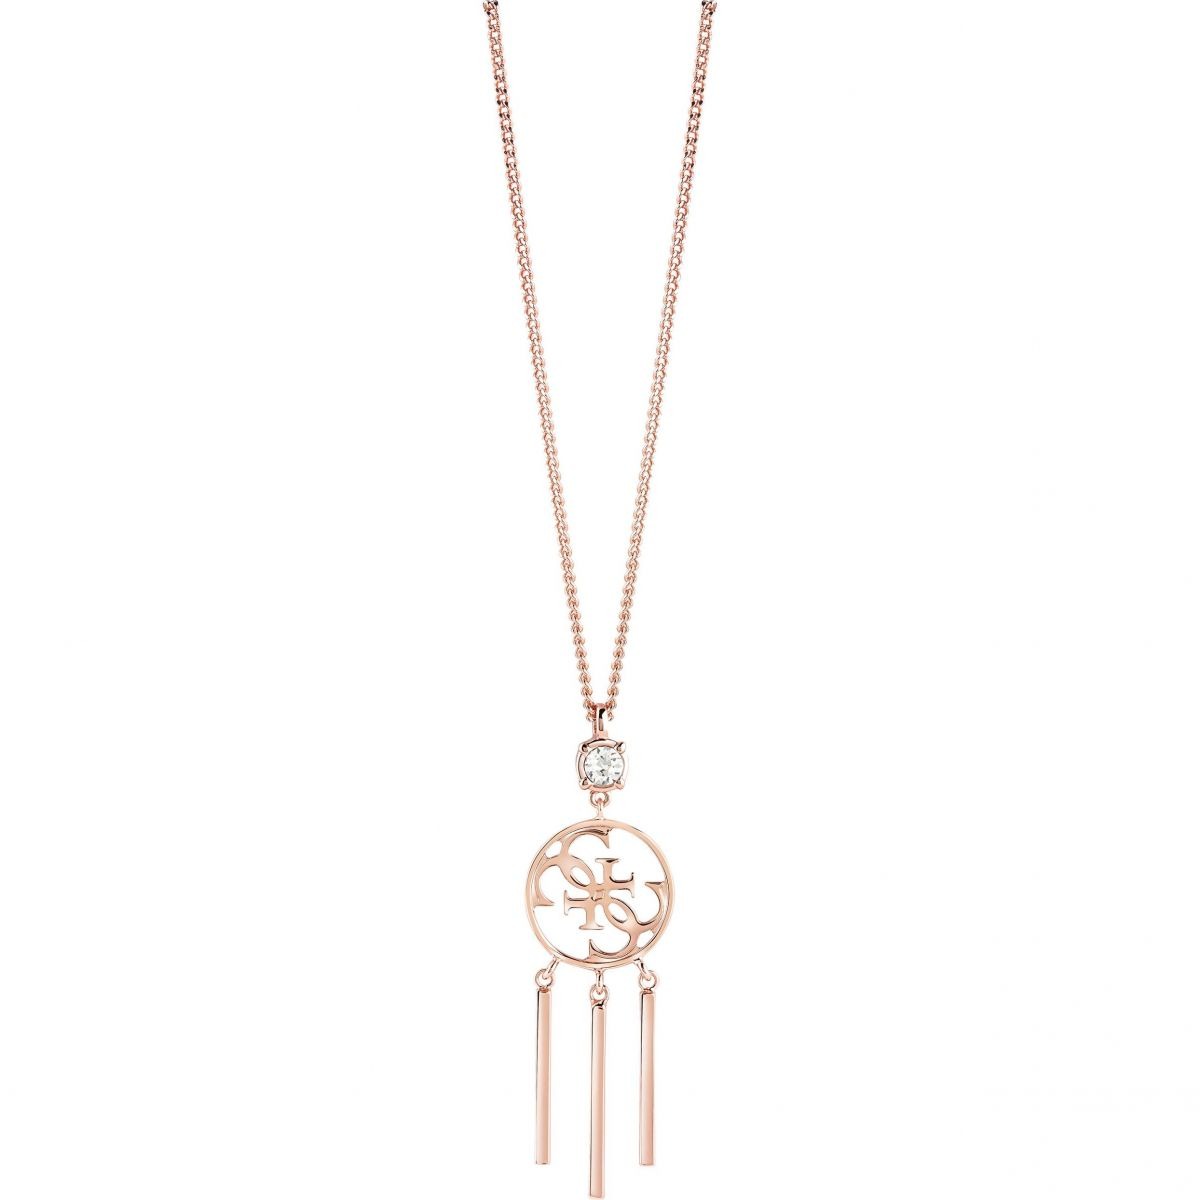 Watch Shop - Necklace in Rose for Women from Guess GOOFASH